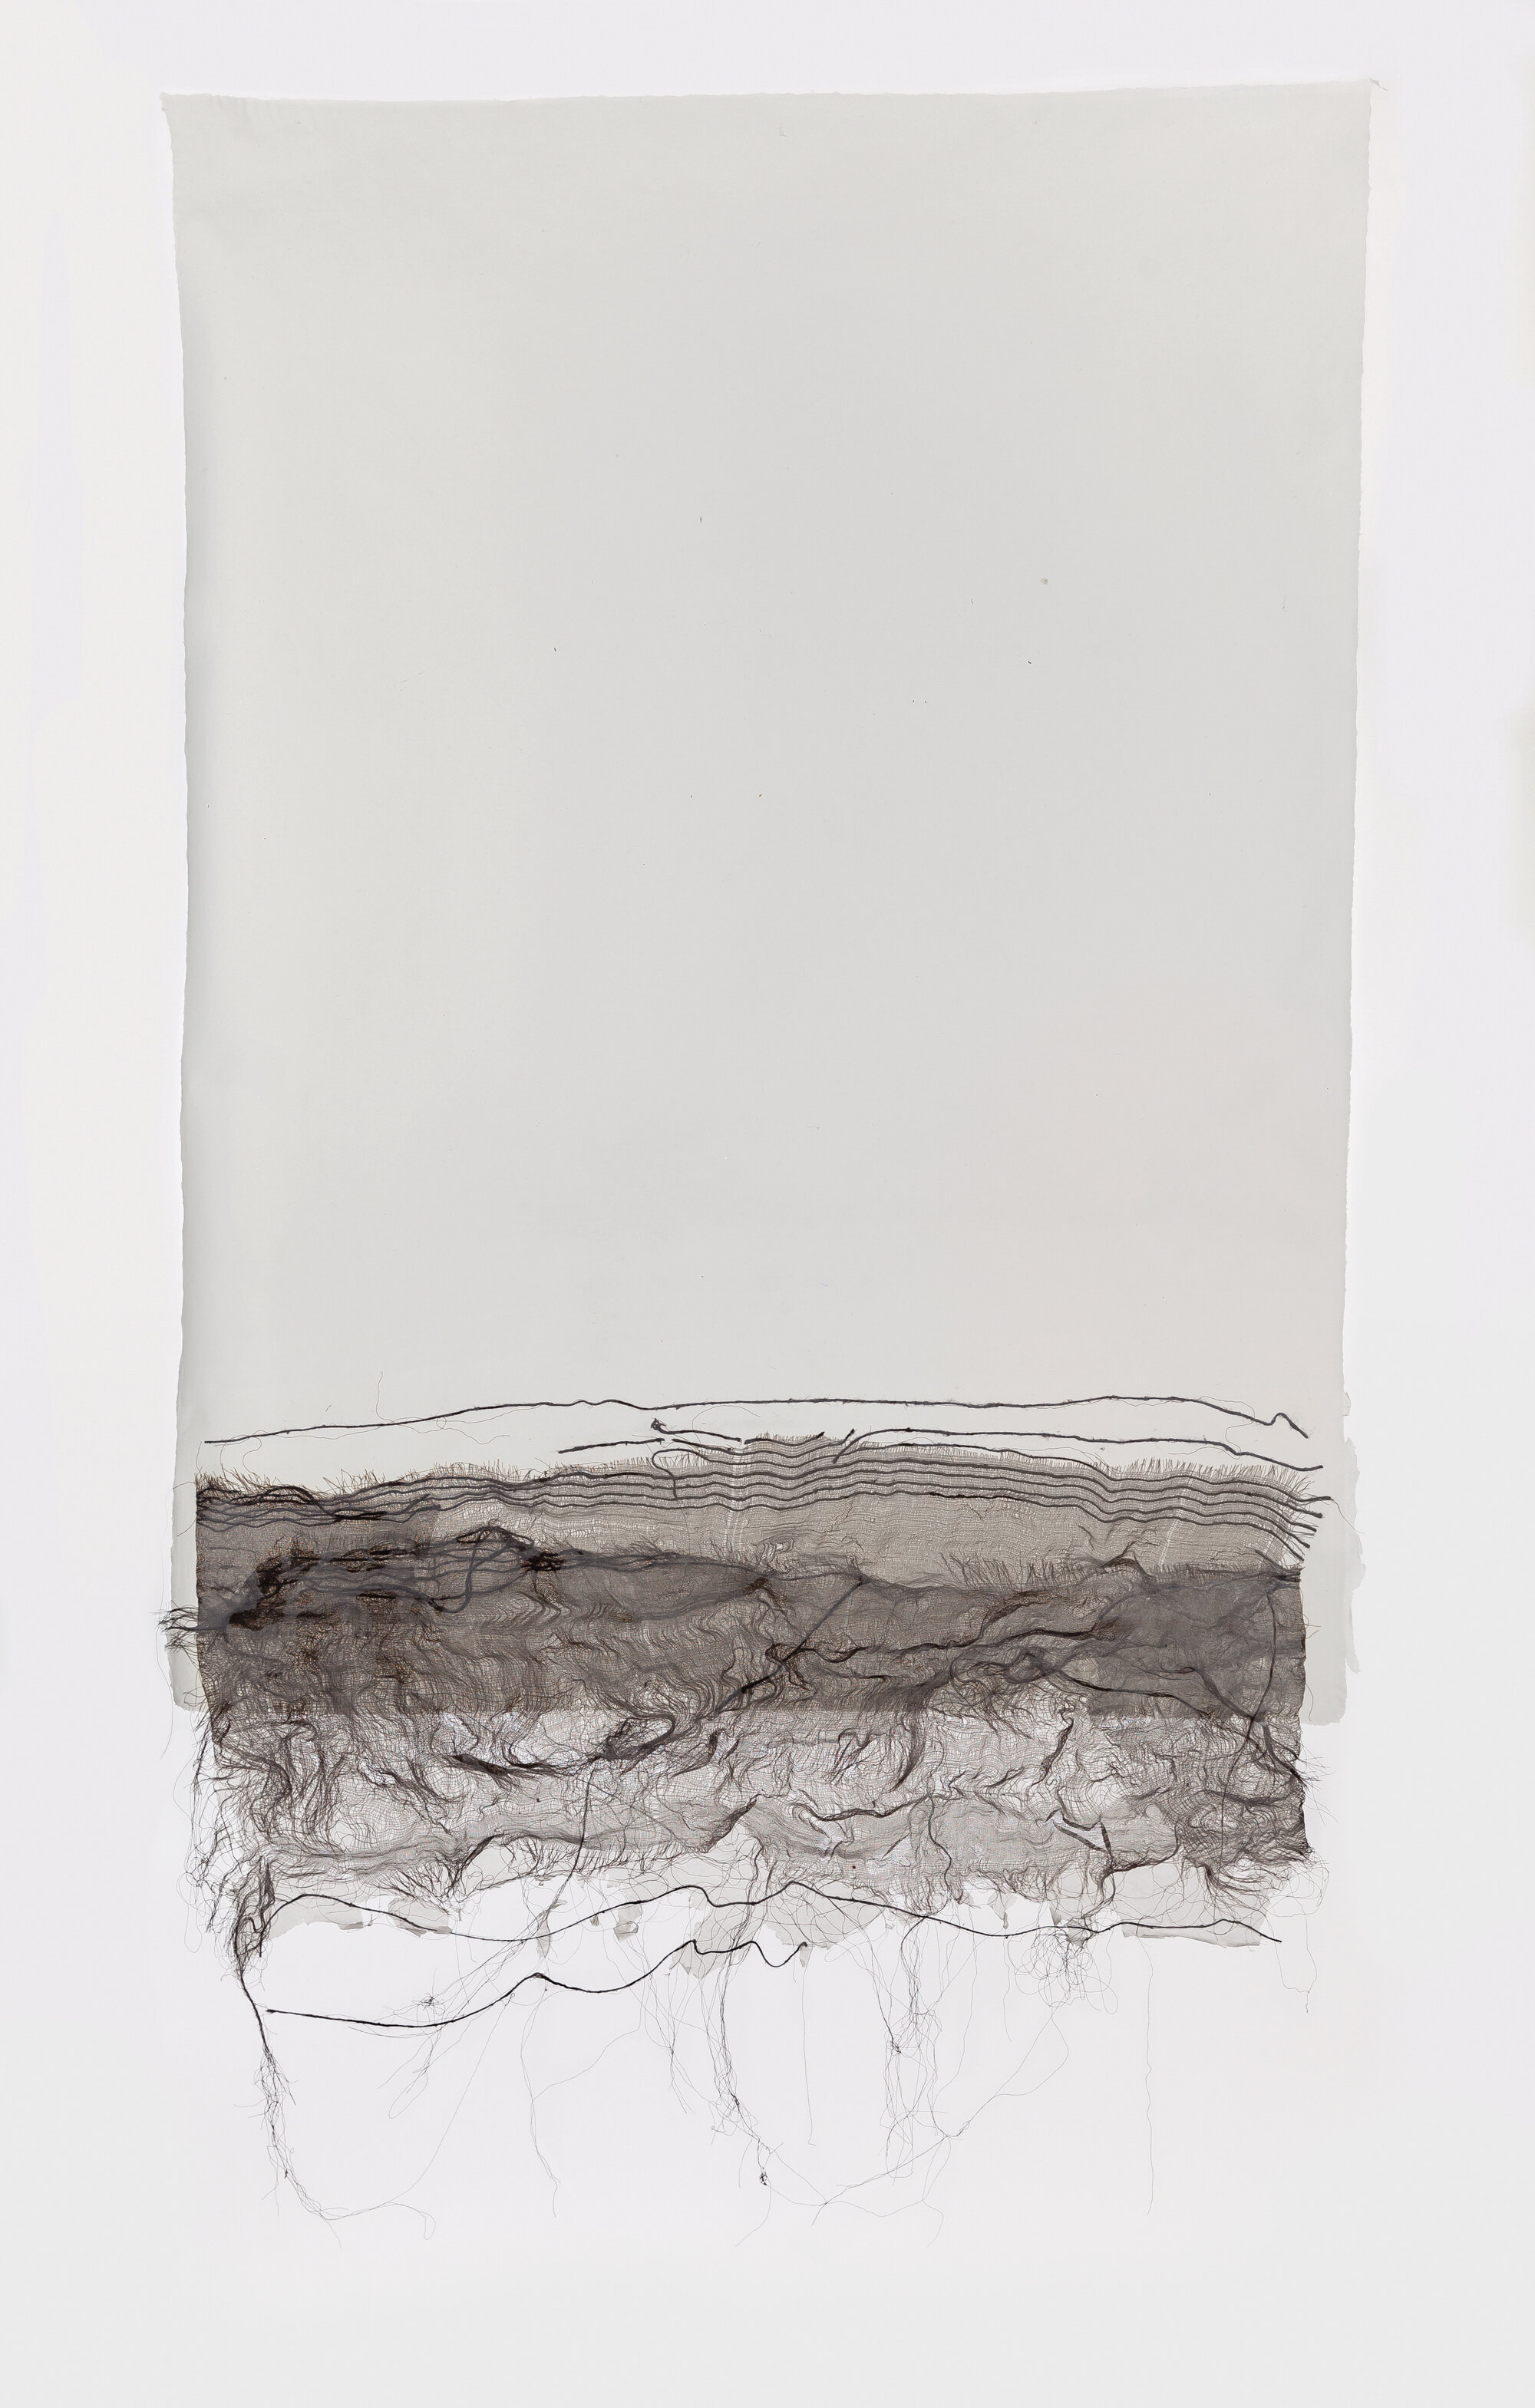   Untitled , 2012 Thread, pigment, and linen handmade paper 41 x 22 in. 